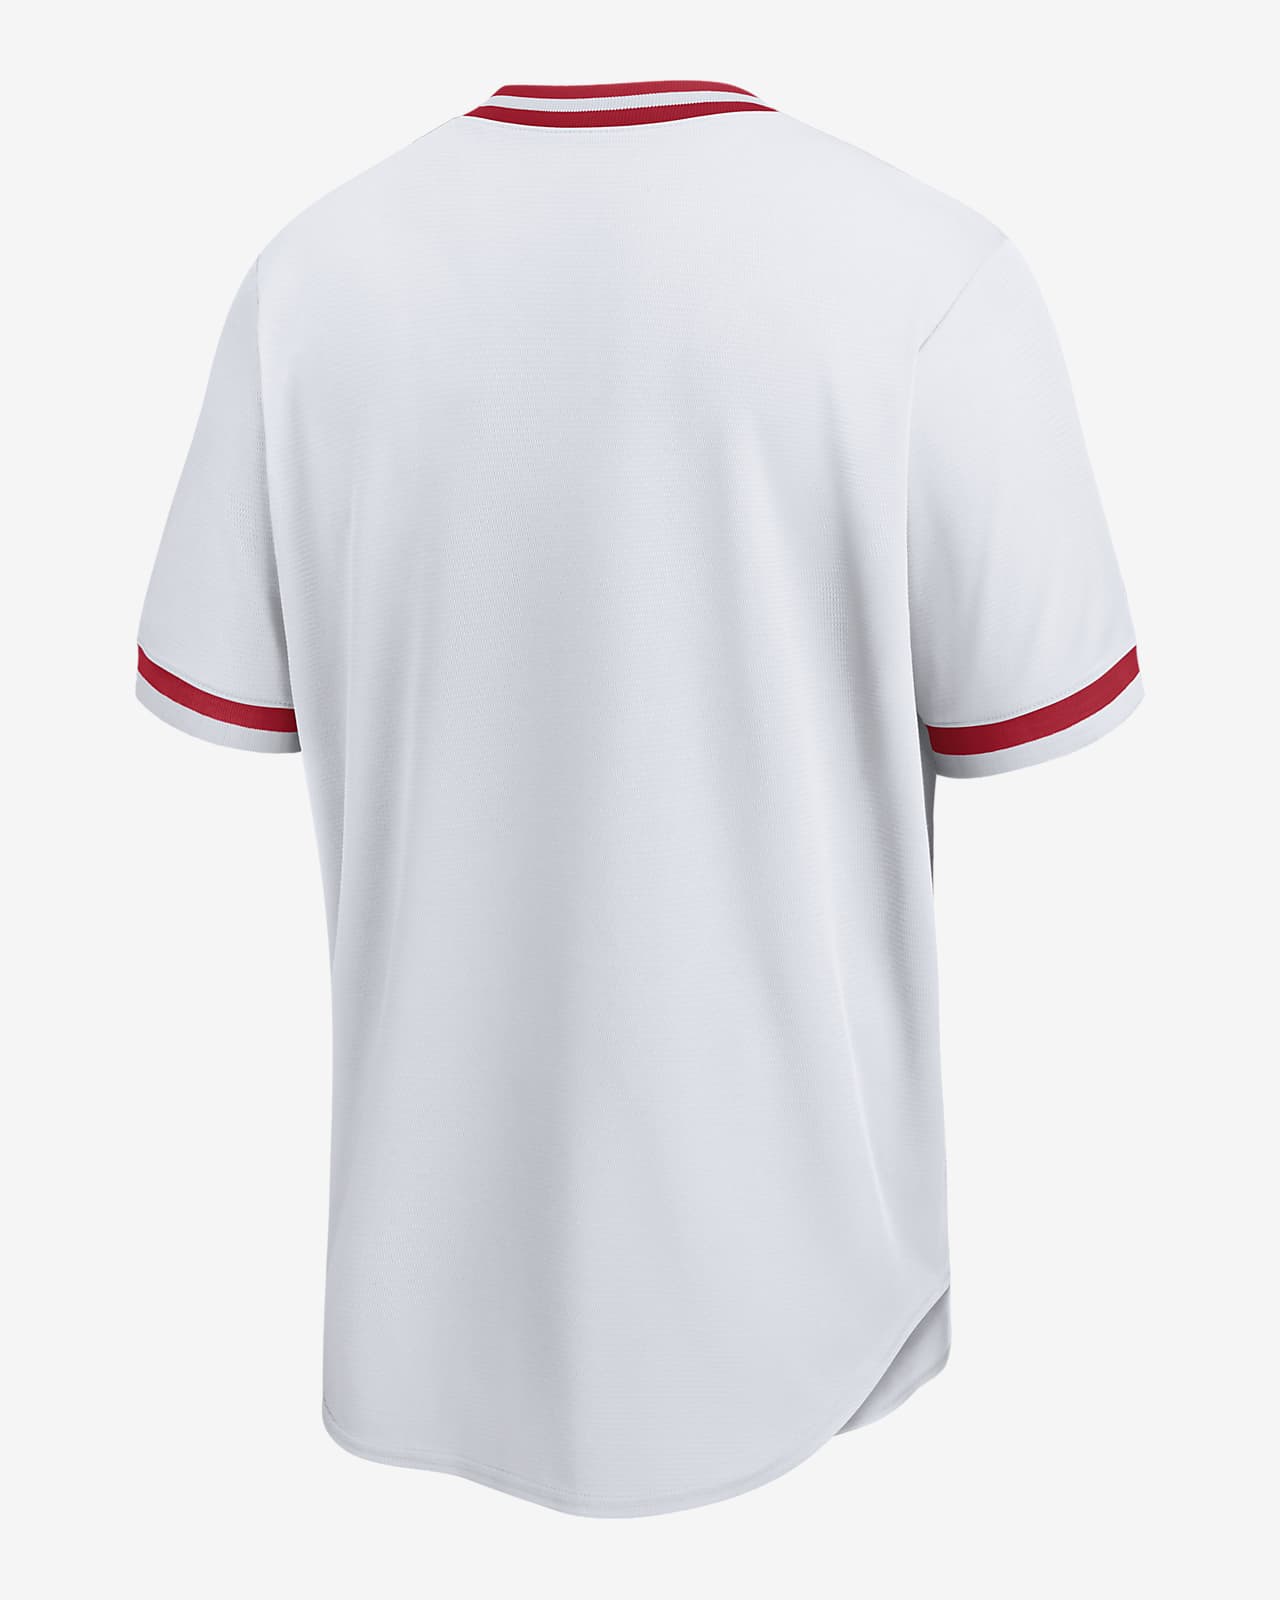 reds white jersey